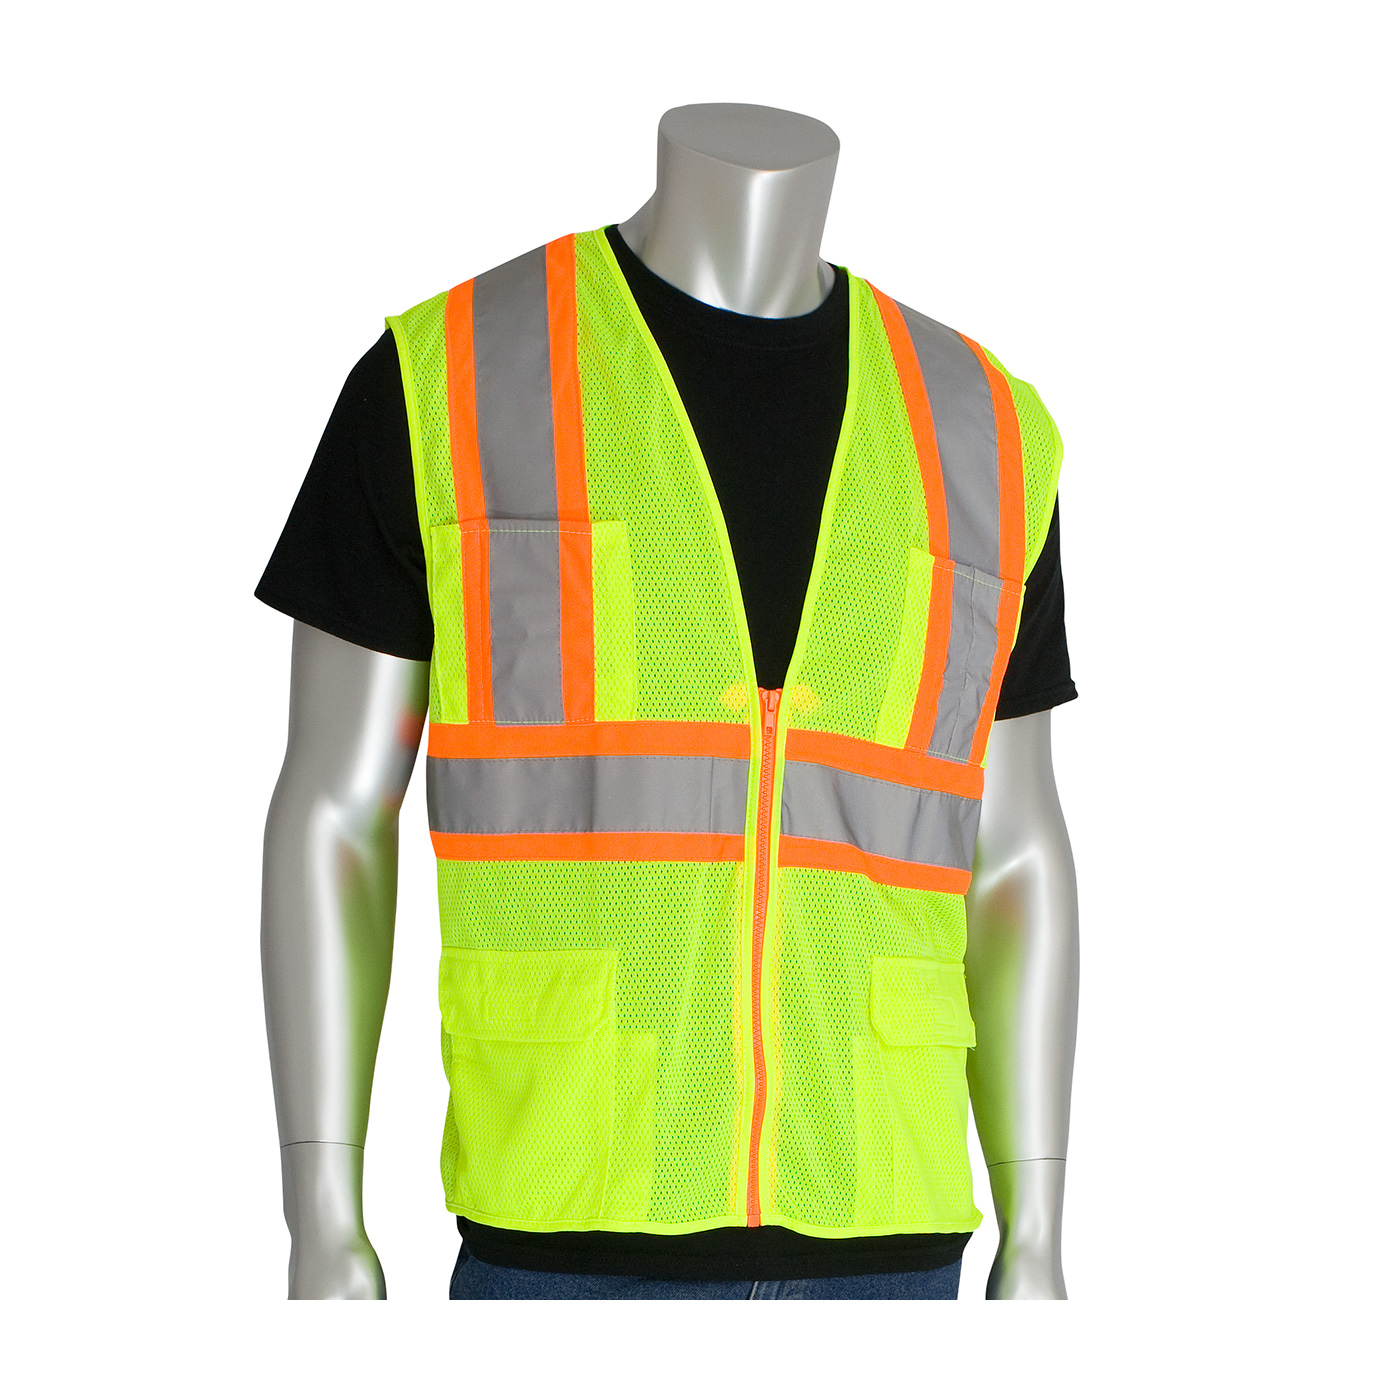 PIP 302-MAPMLY-L ANSI Type R Class 2 Yellow Two-Tone Eleven Pocket Premium Mesh Surveyors Vest - Large PID-302 MAPMLY L